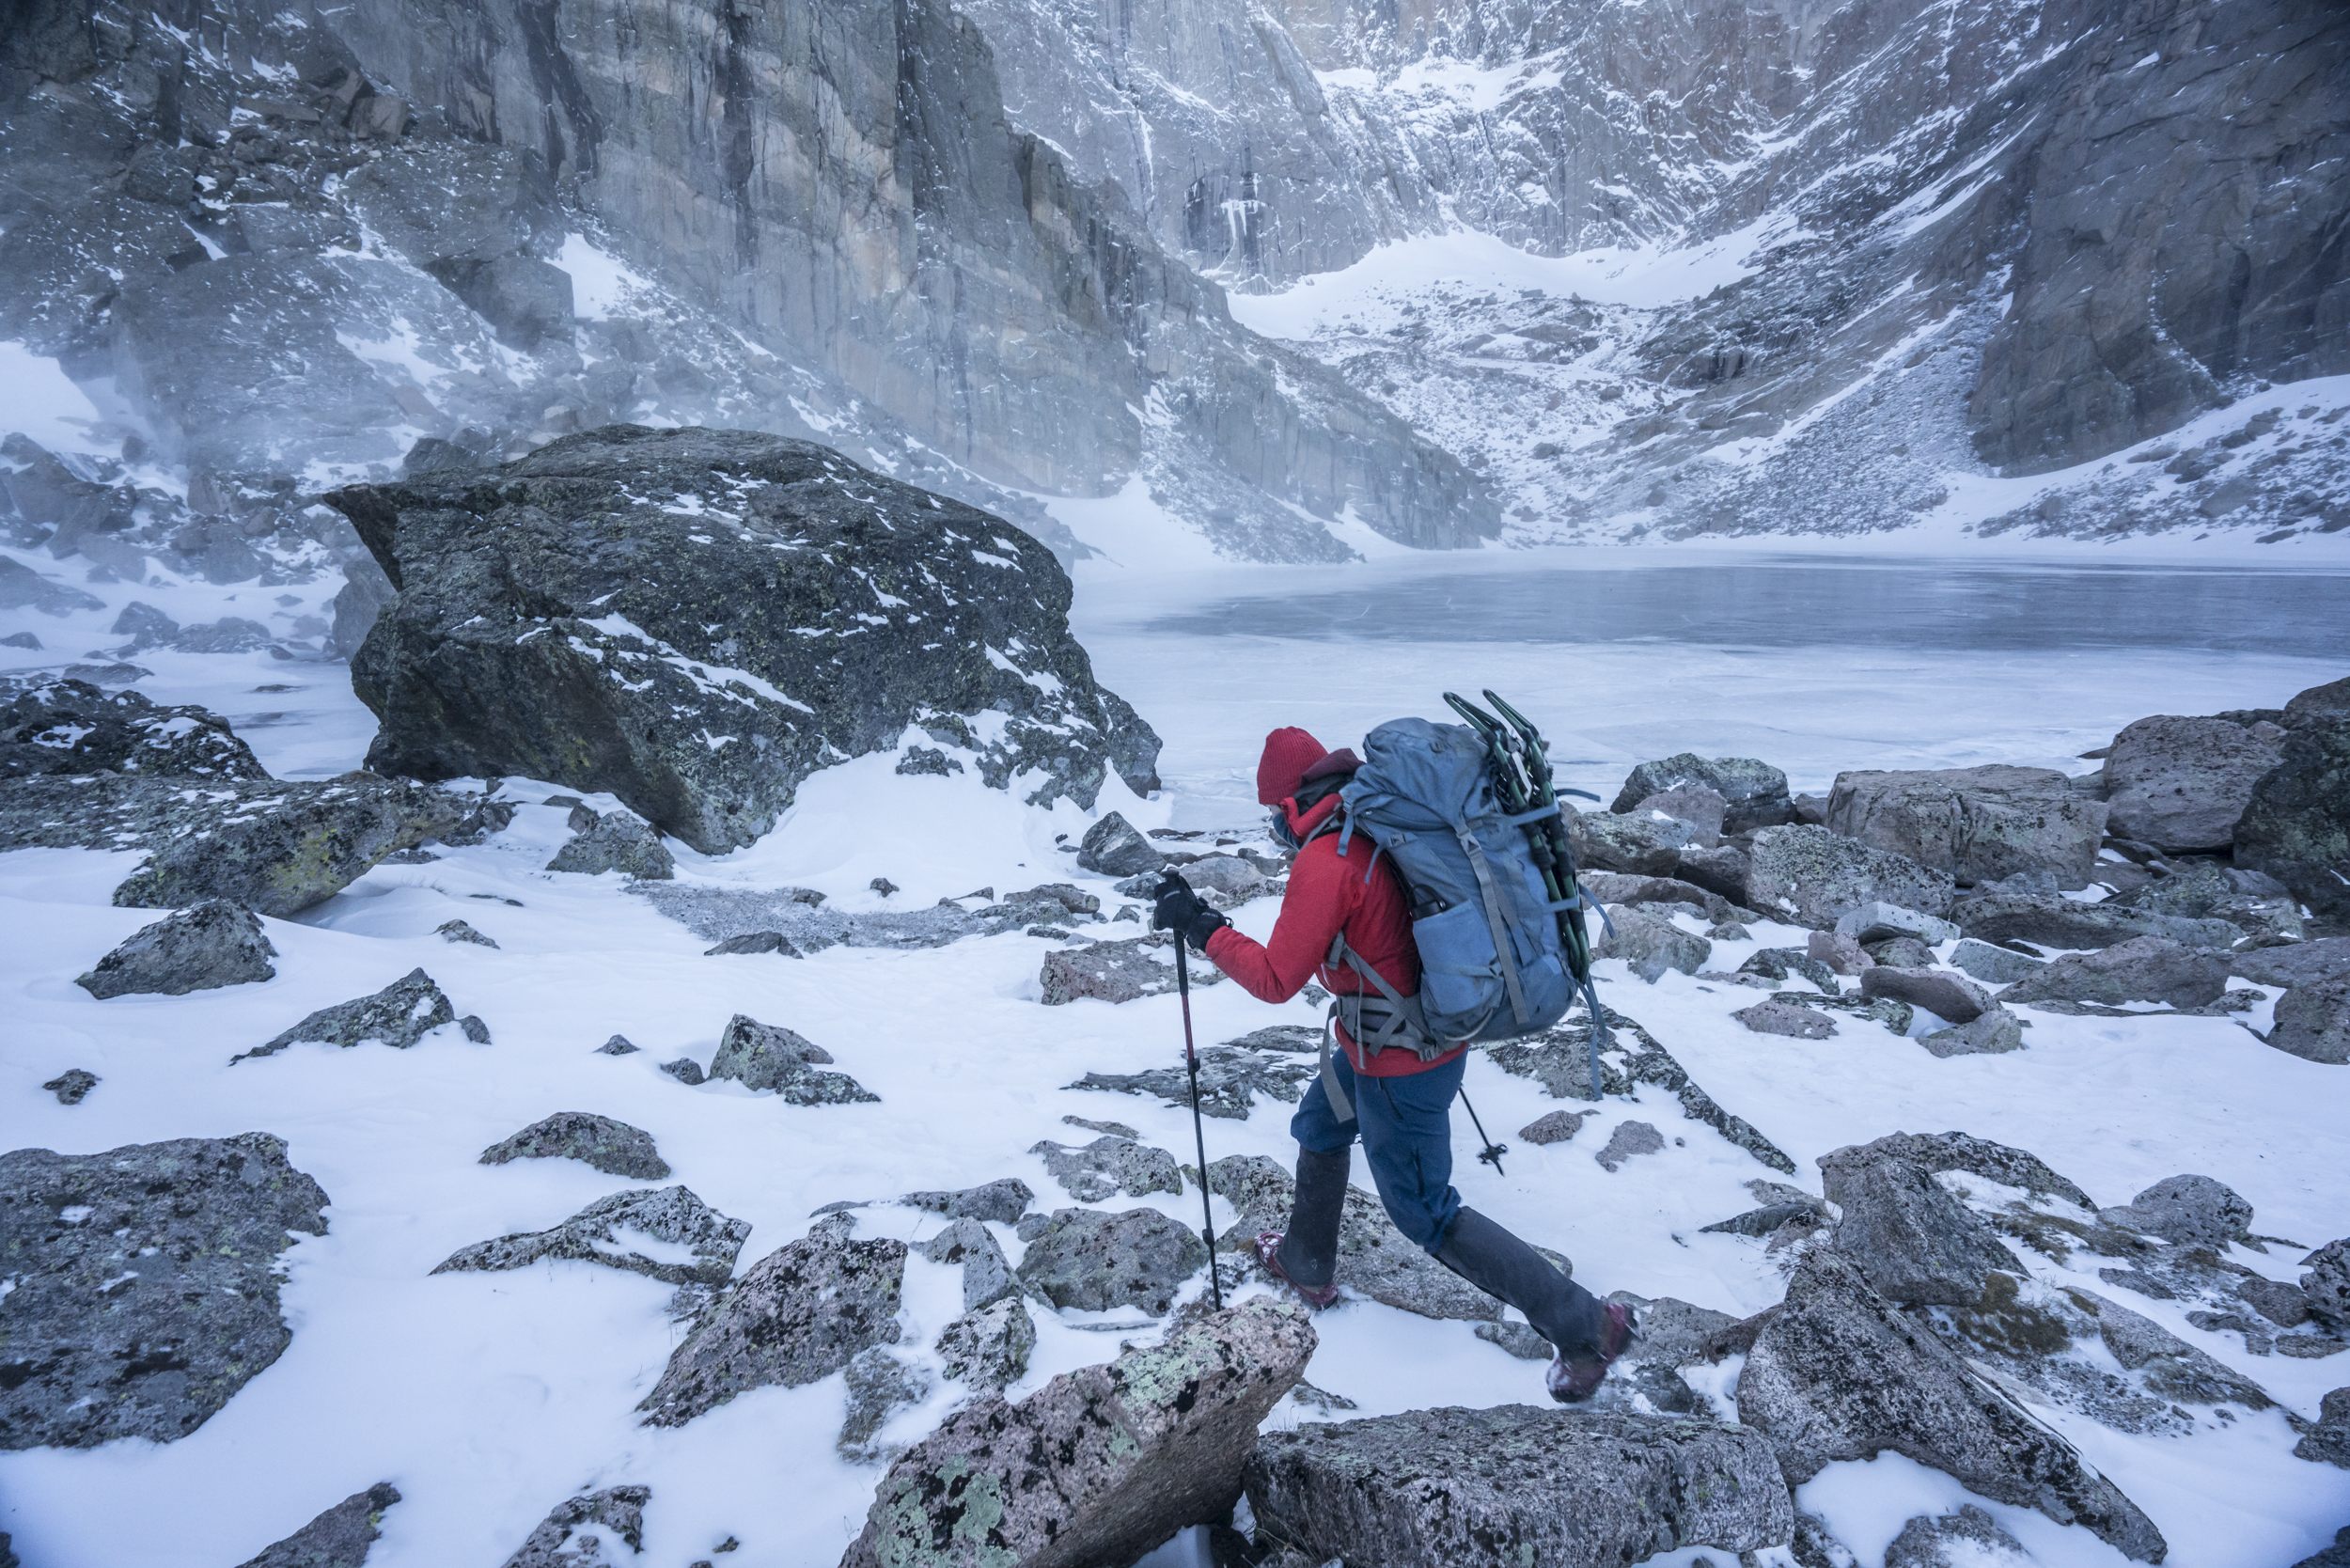  Appreciating the calm complexities of cold, a backpacker explores the harsh winter wilderness that is Rocky Mountain National Park's Chasm Lake.  Chasm Lake, Colorado 